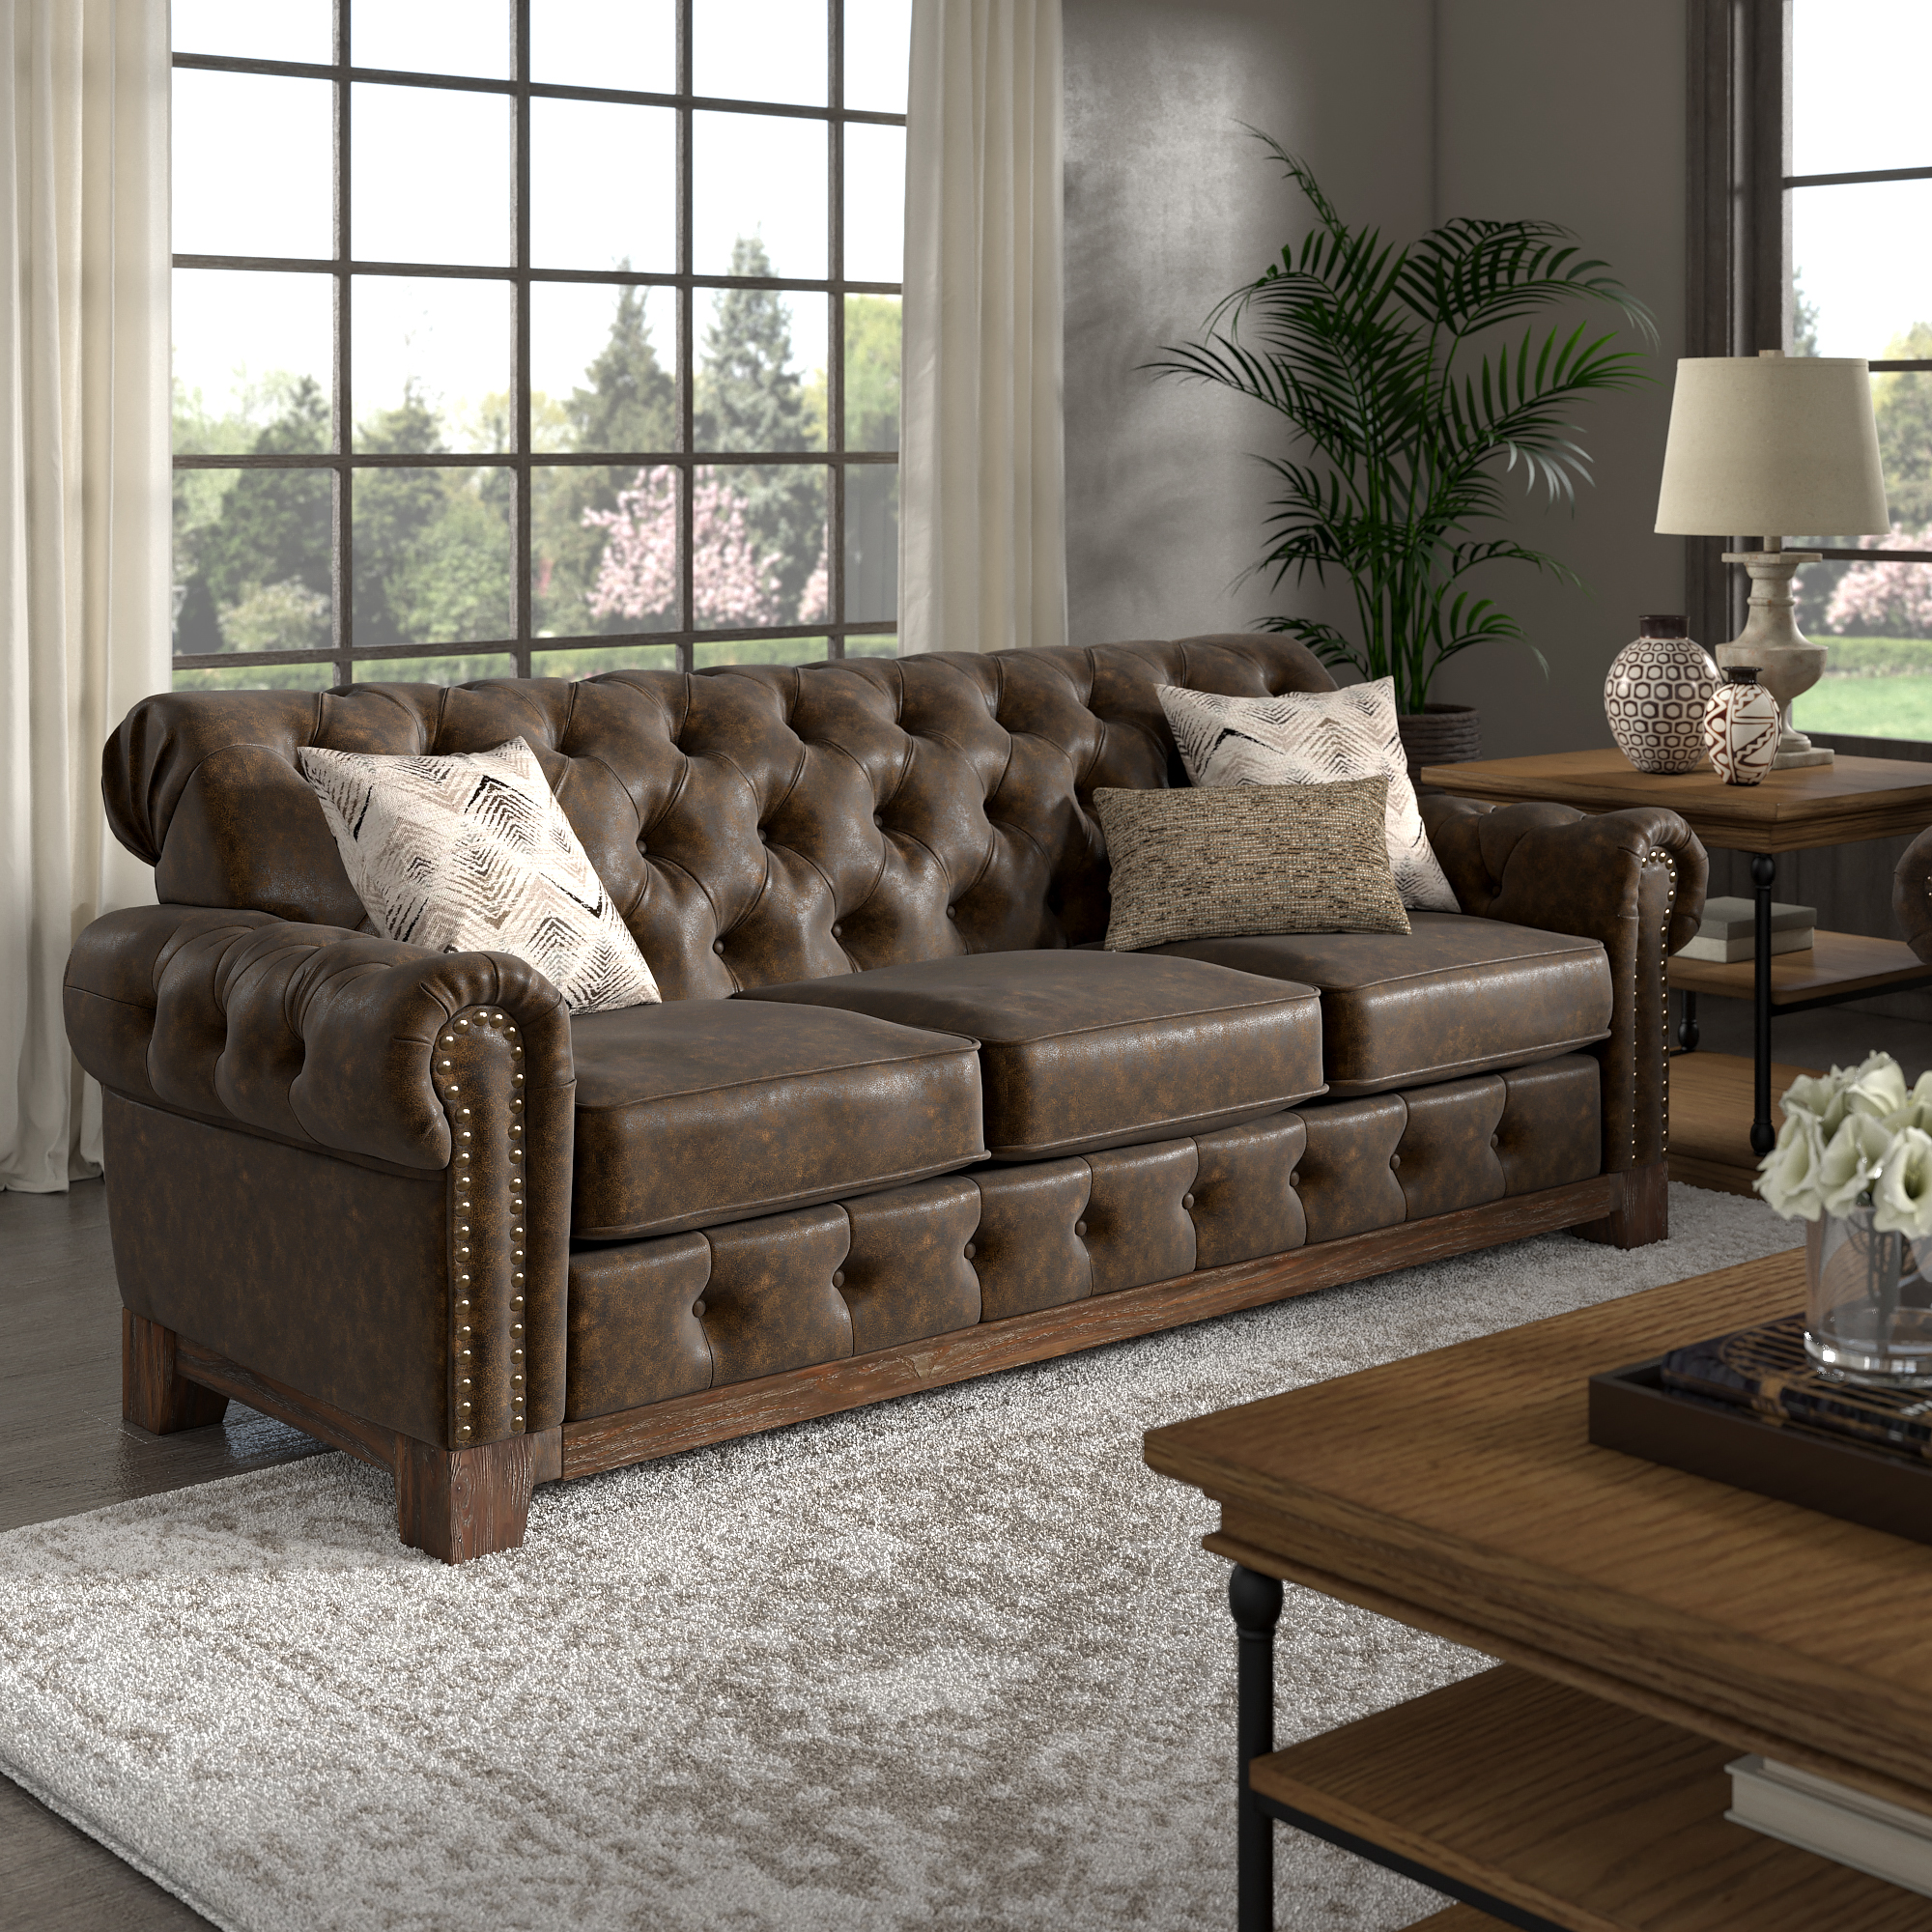 Tufted Rolled Arm Chesterfield Sofa